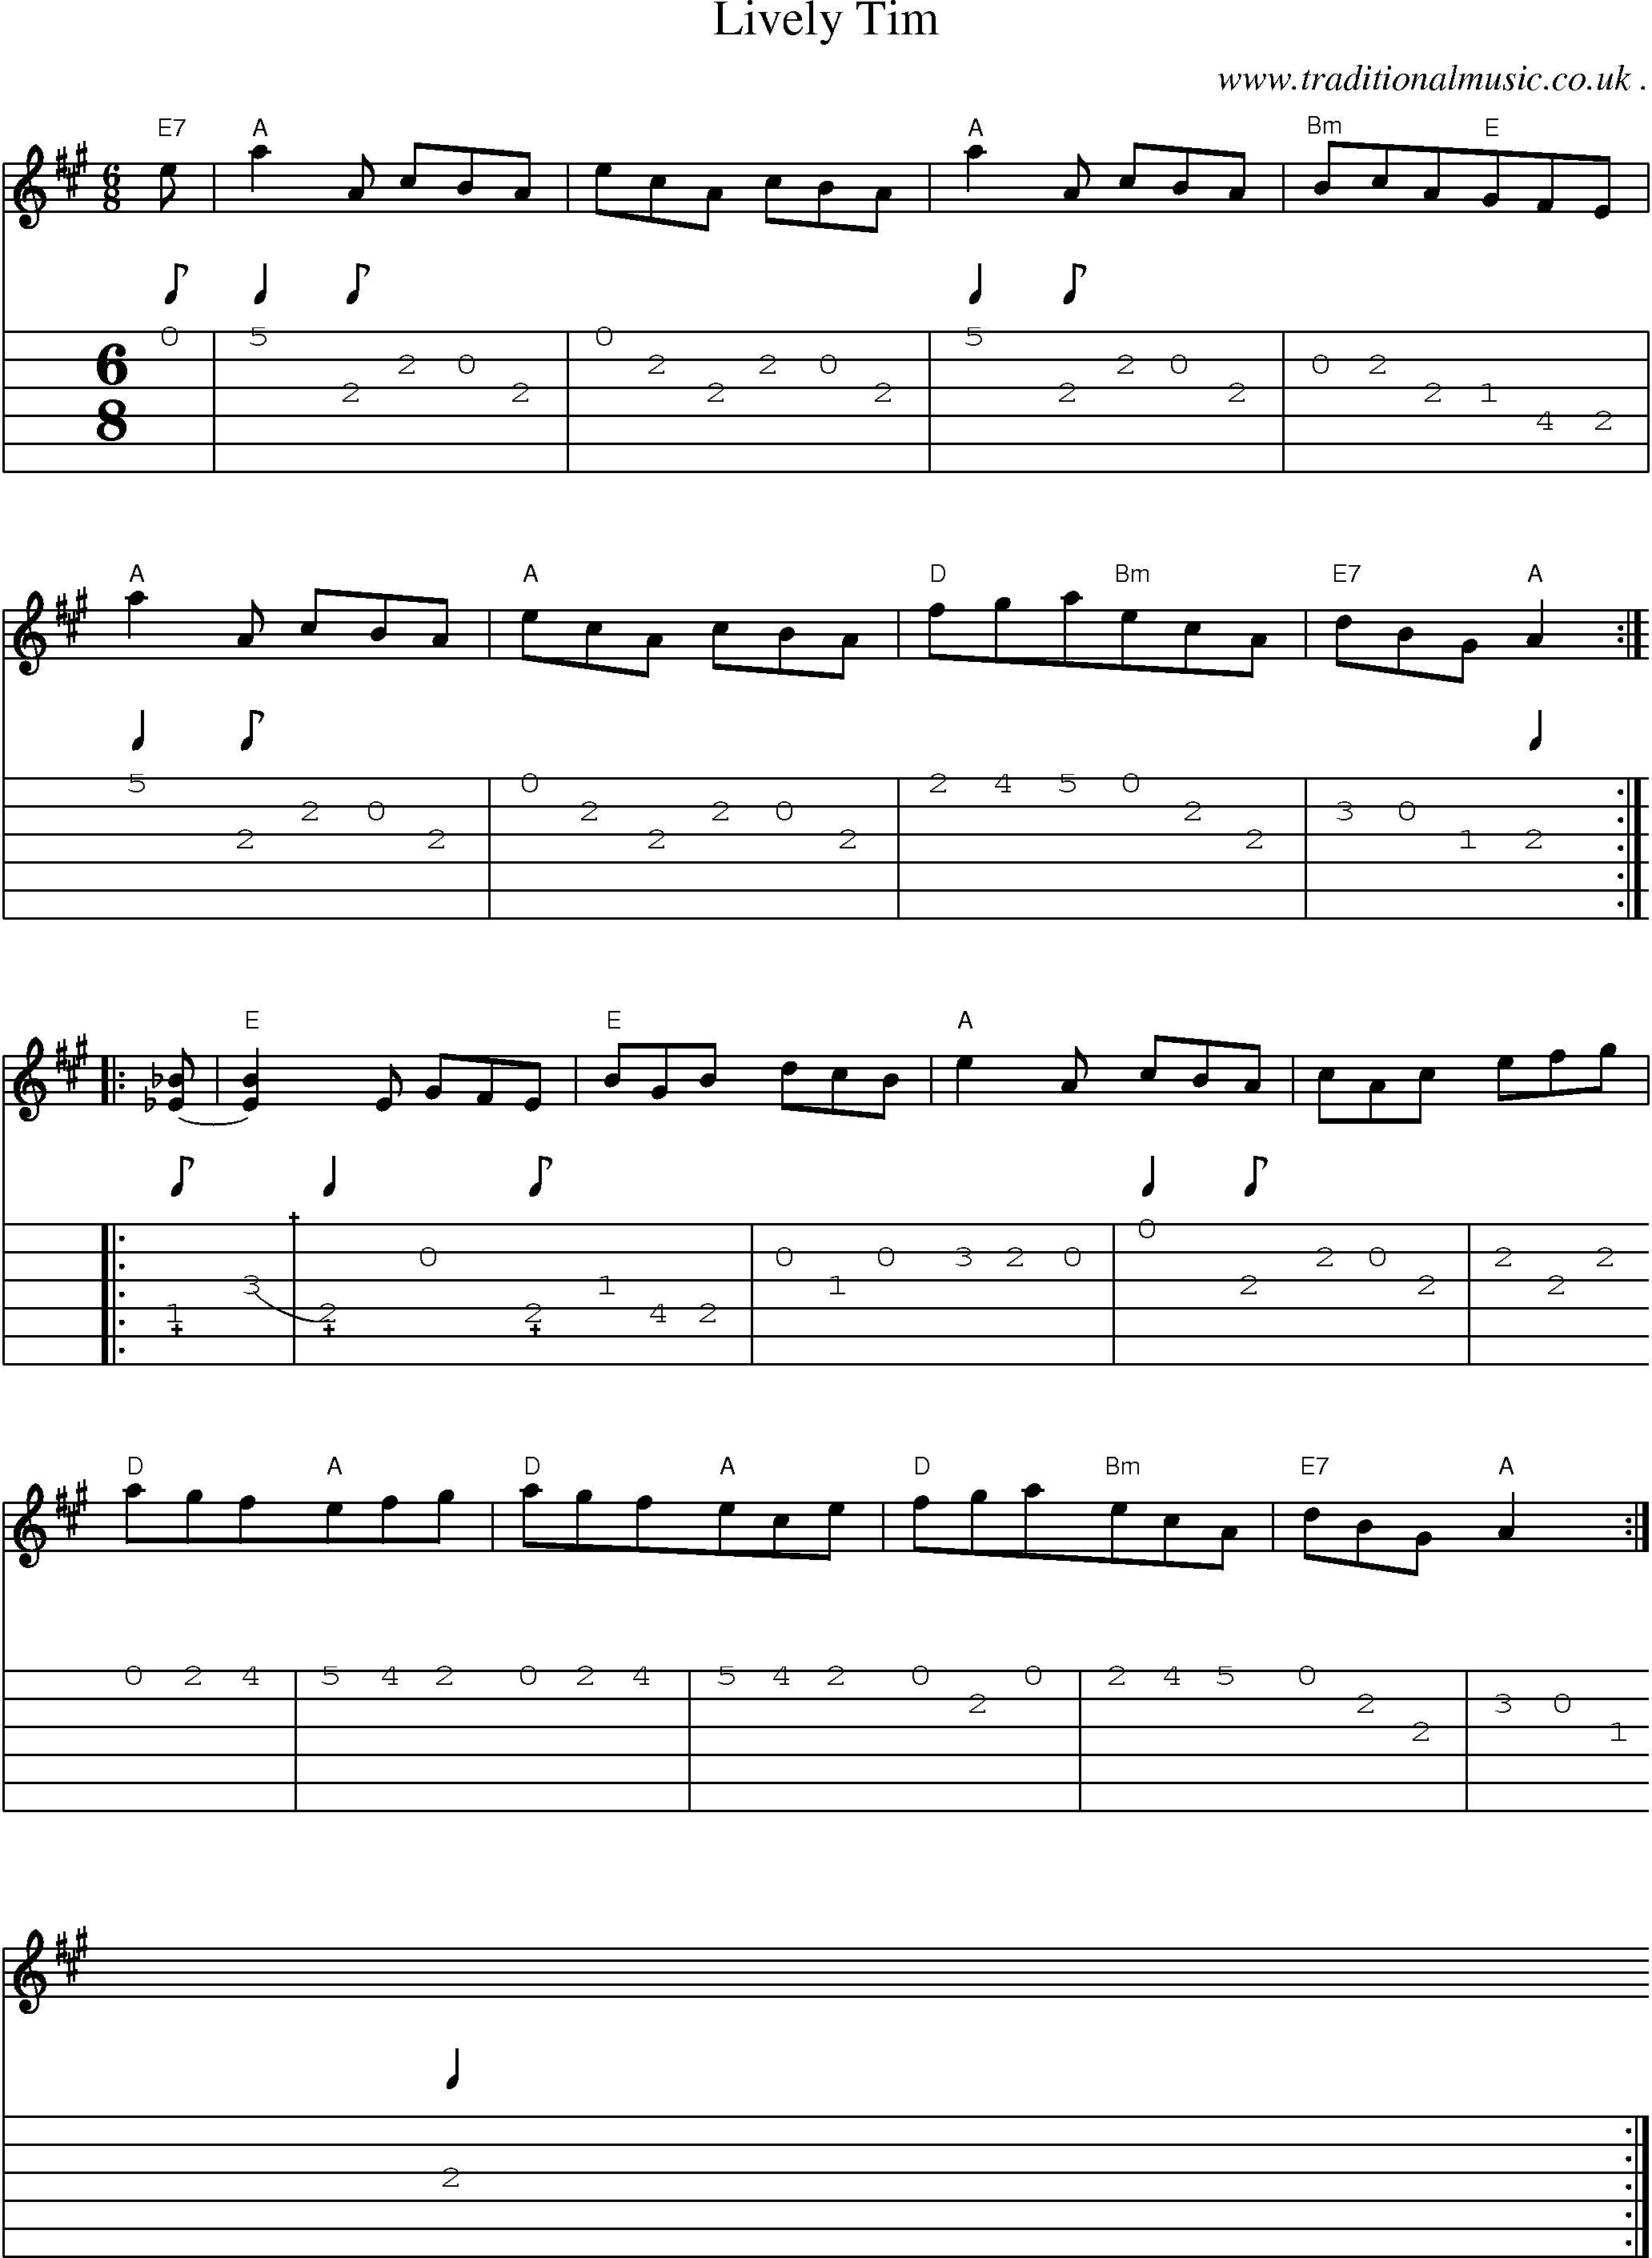 Sheet-Music and Guitar Tabs for Lively Tim